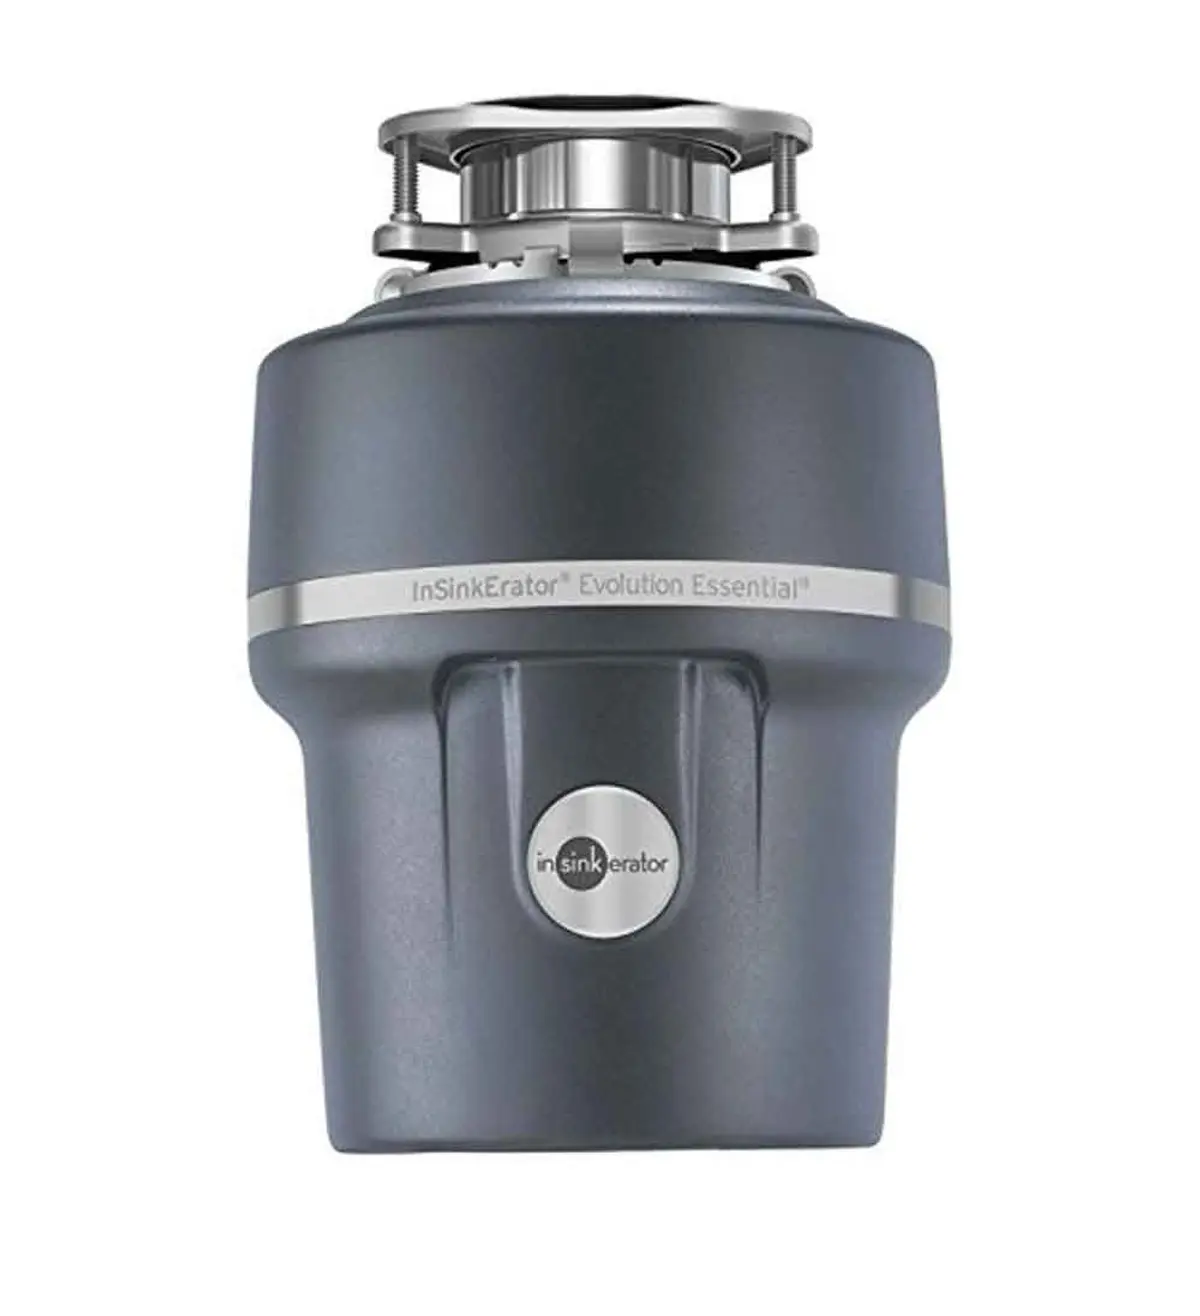 InSinkErator Evolution XTR 3/4 HP Household Garbage Disposal Review